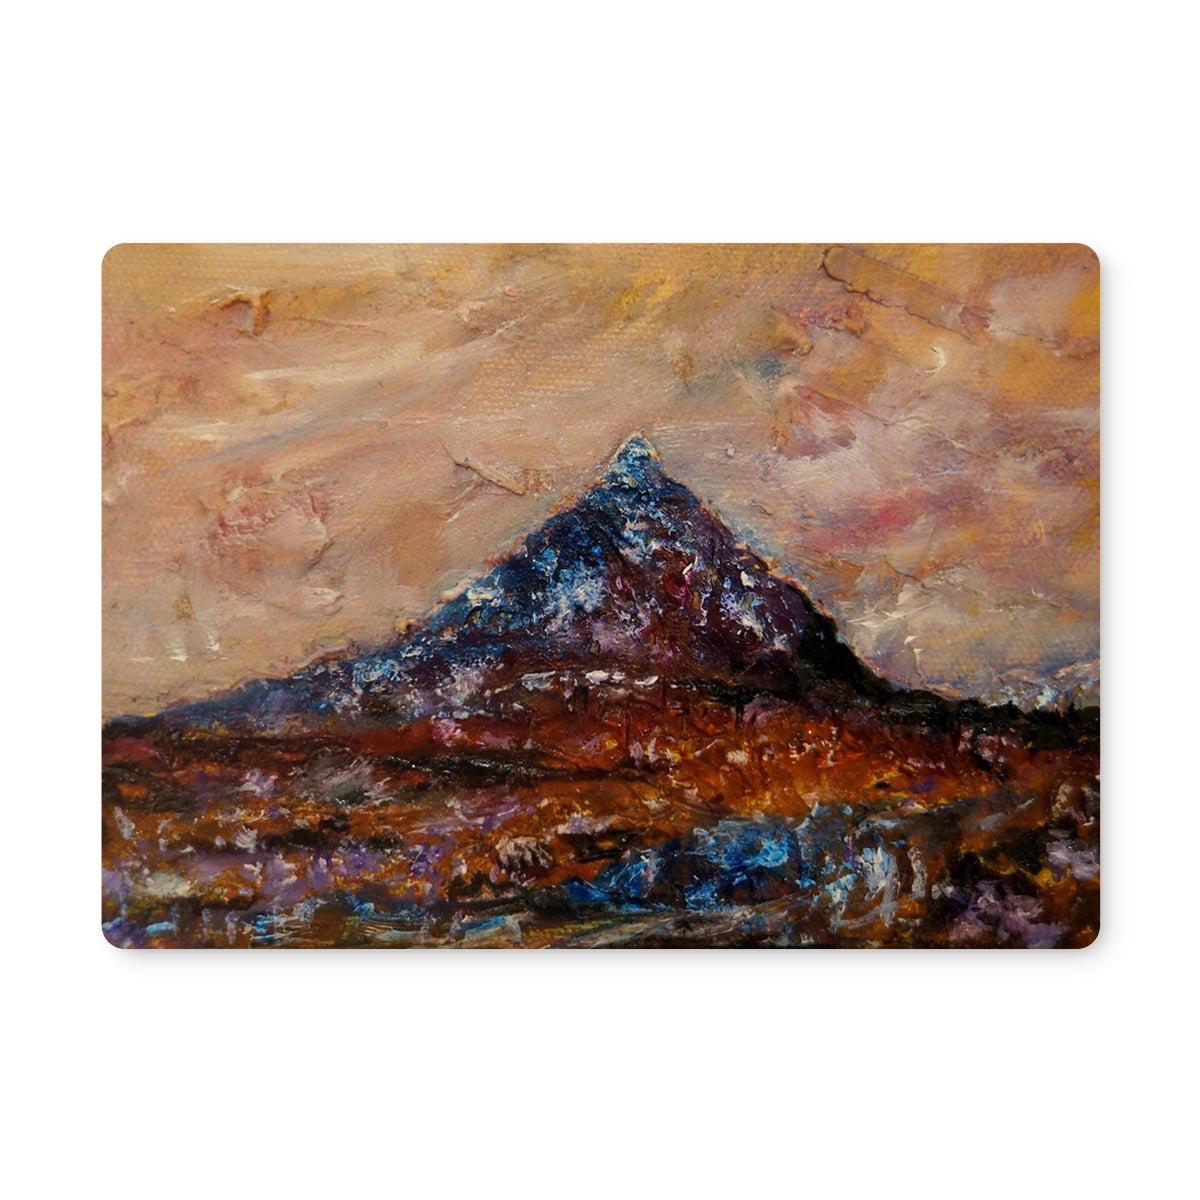 Buachaille Etive Mòr Art Gifts Placemat-Placemats-Glencoe Art Gallery-2 Placemats-Paintings, Prints, Homeware, Art Gifts From Scotland By Scottish Artist Kevin Hunter